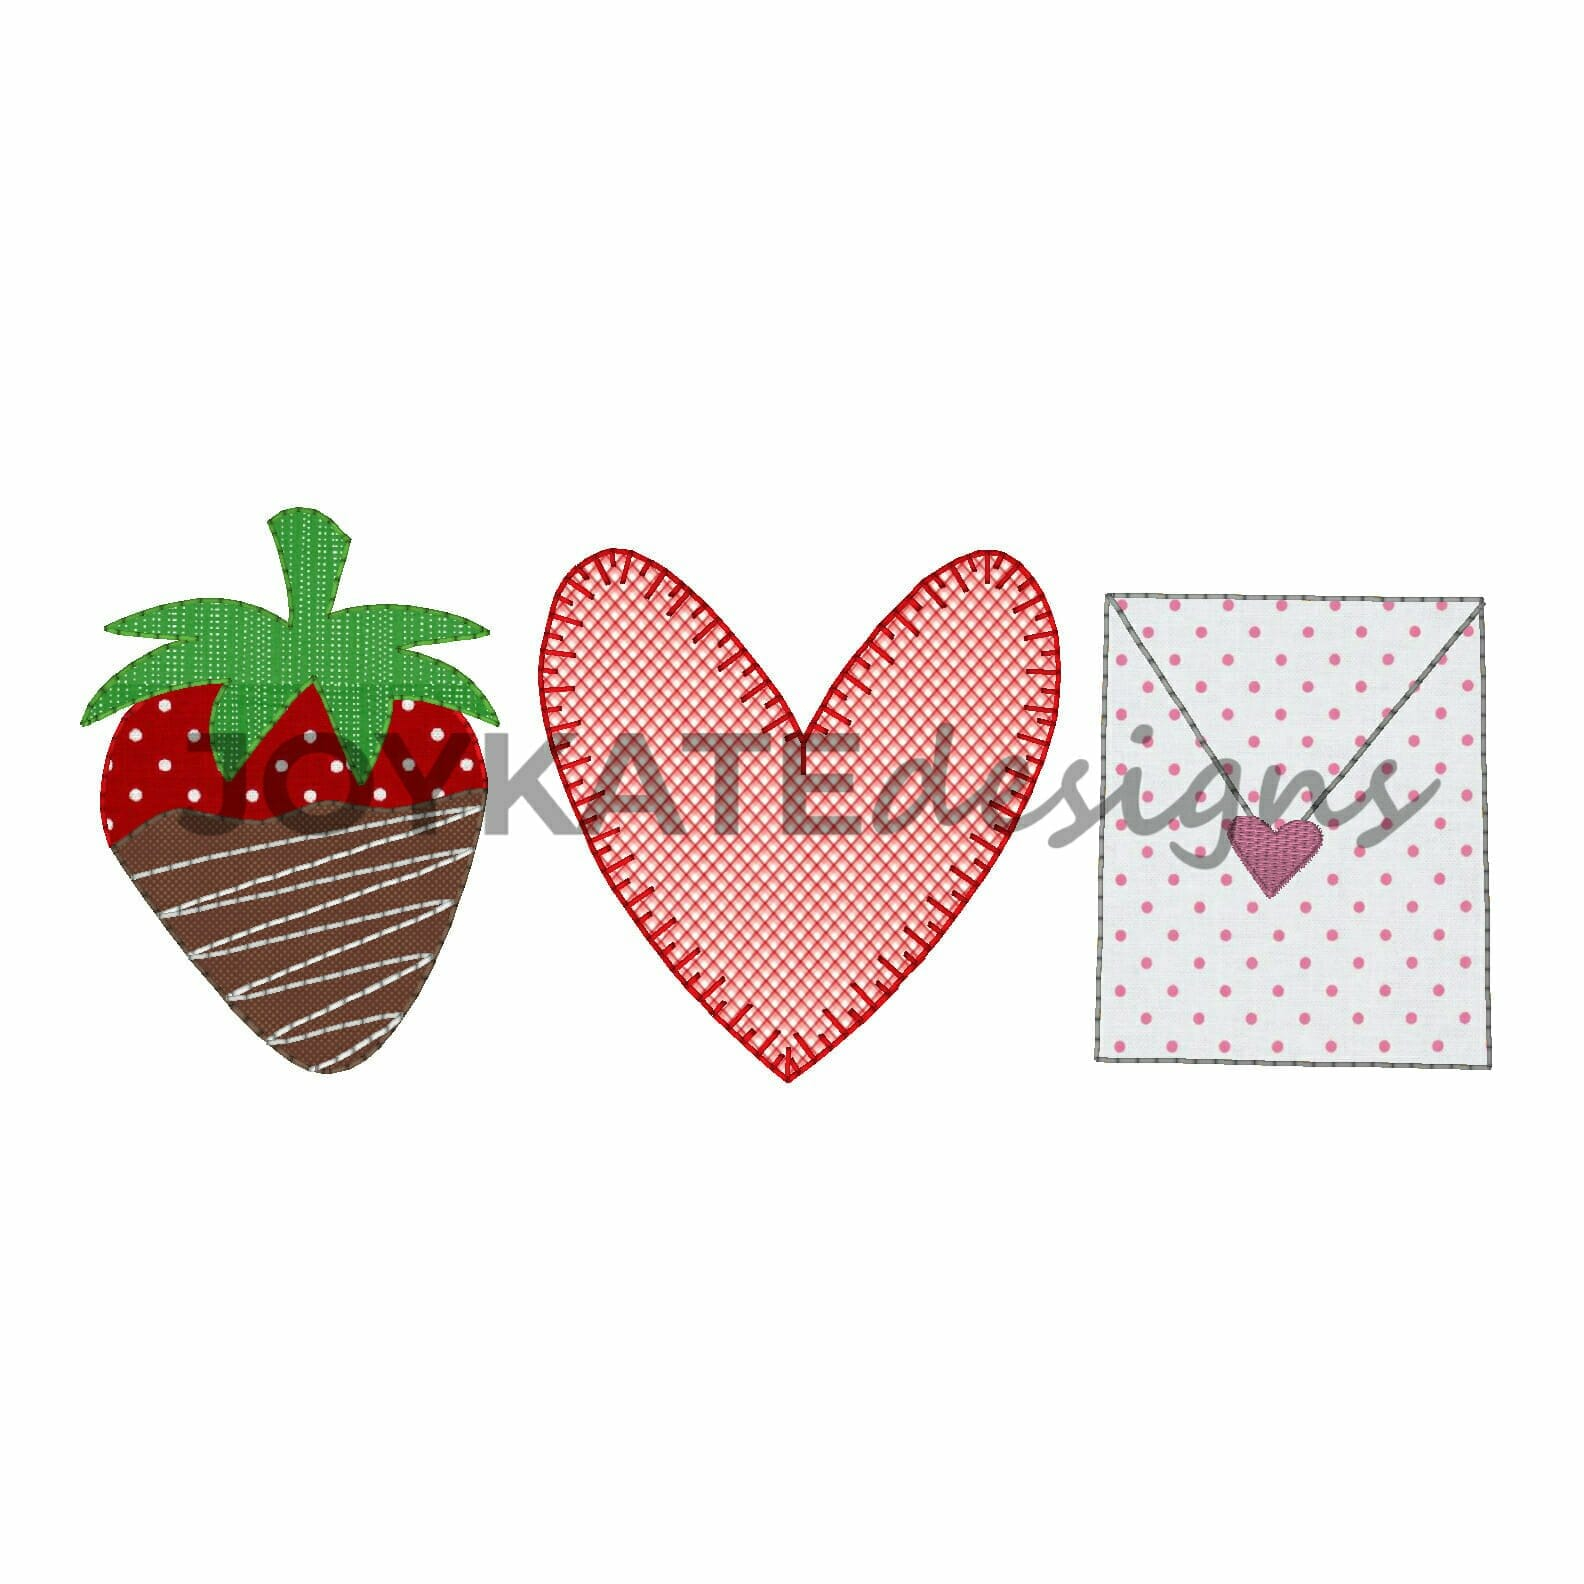 Strawberry Embroidery Pattern Valentines Day Trio Vintage Applique Embroidery Design